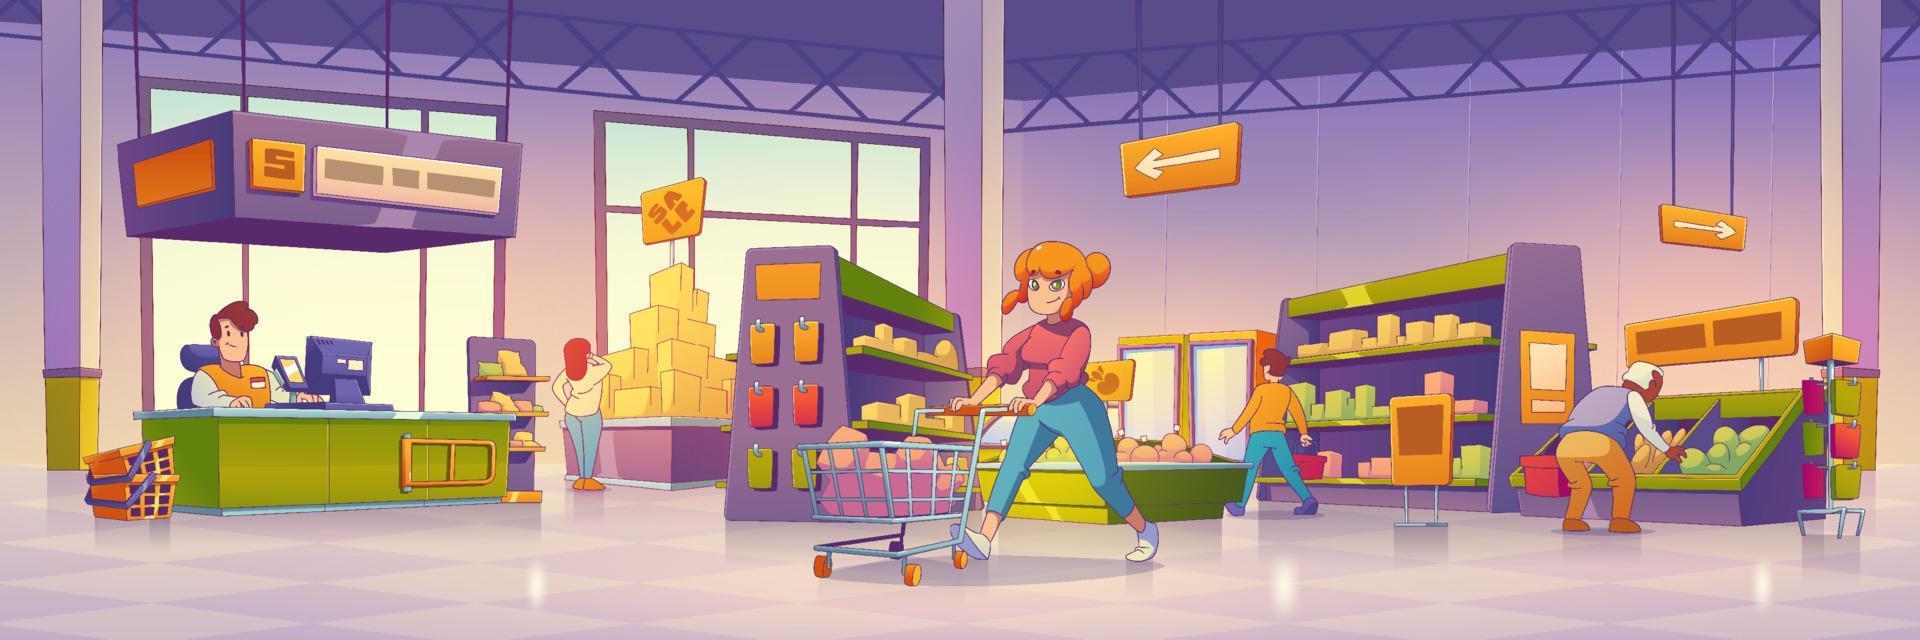 Supermarket with customers, shelves with food vector